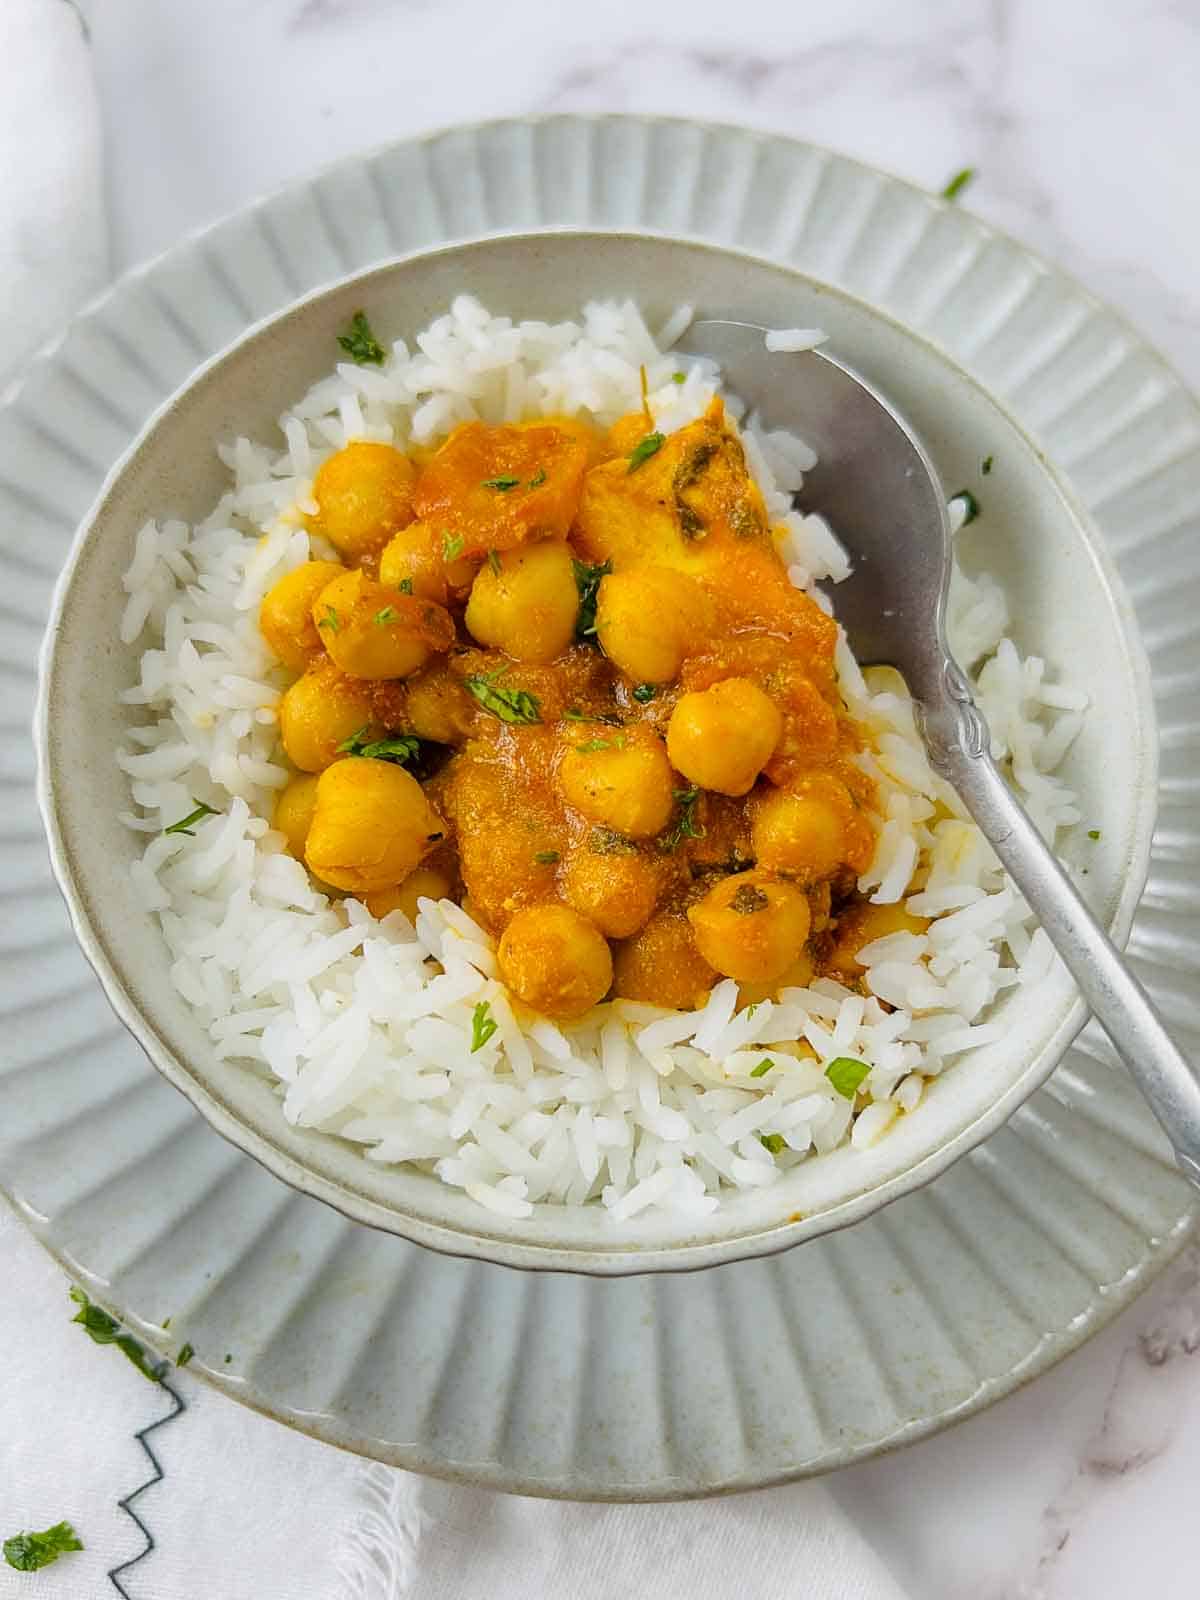 Chana paneer served on a bed of rice.